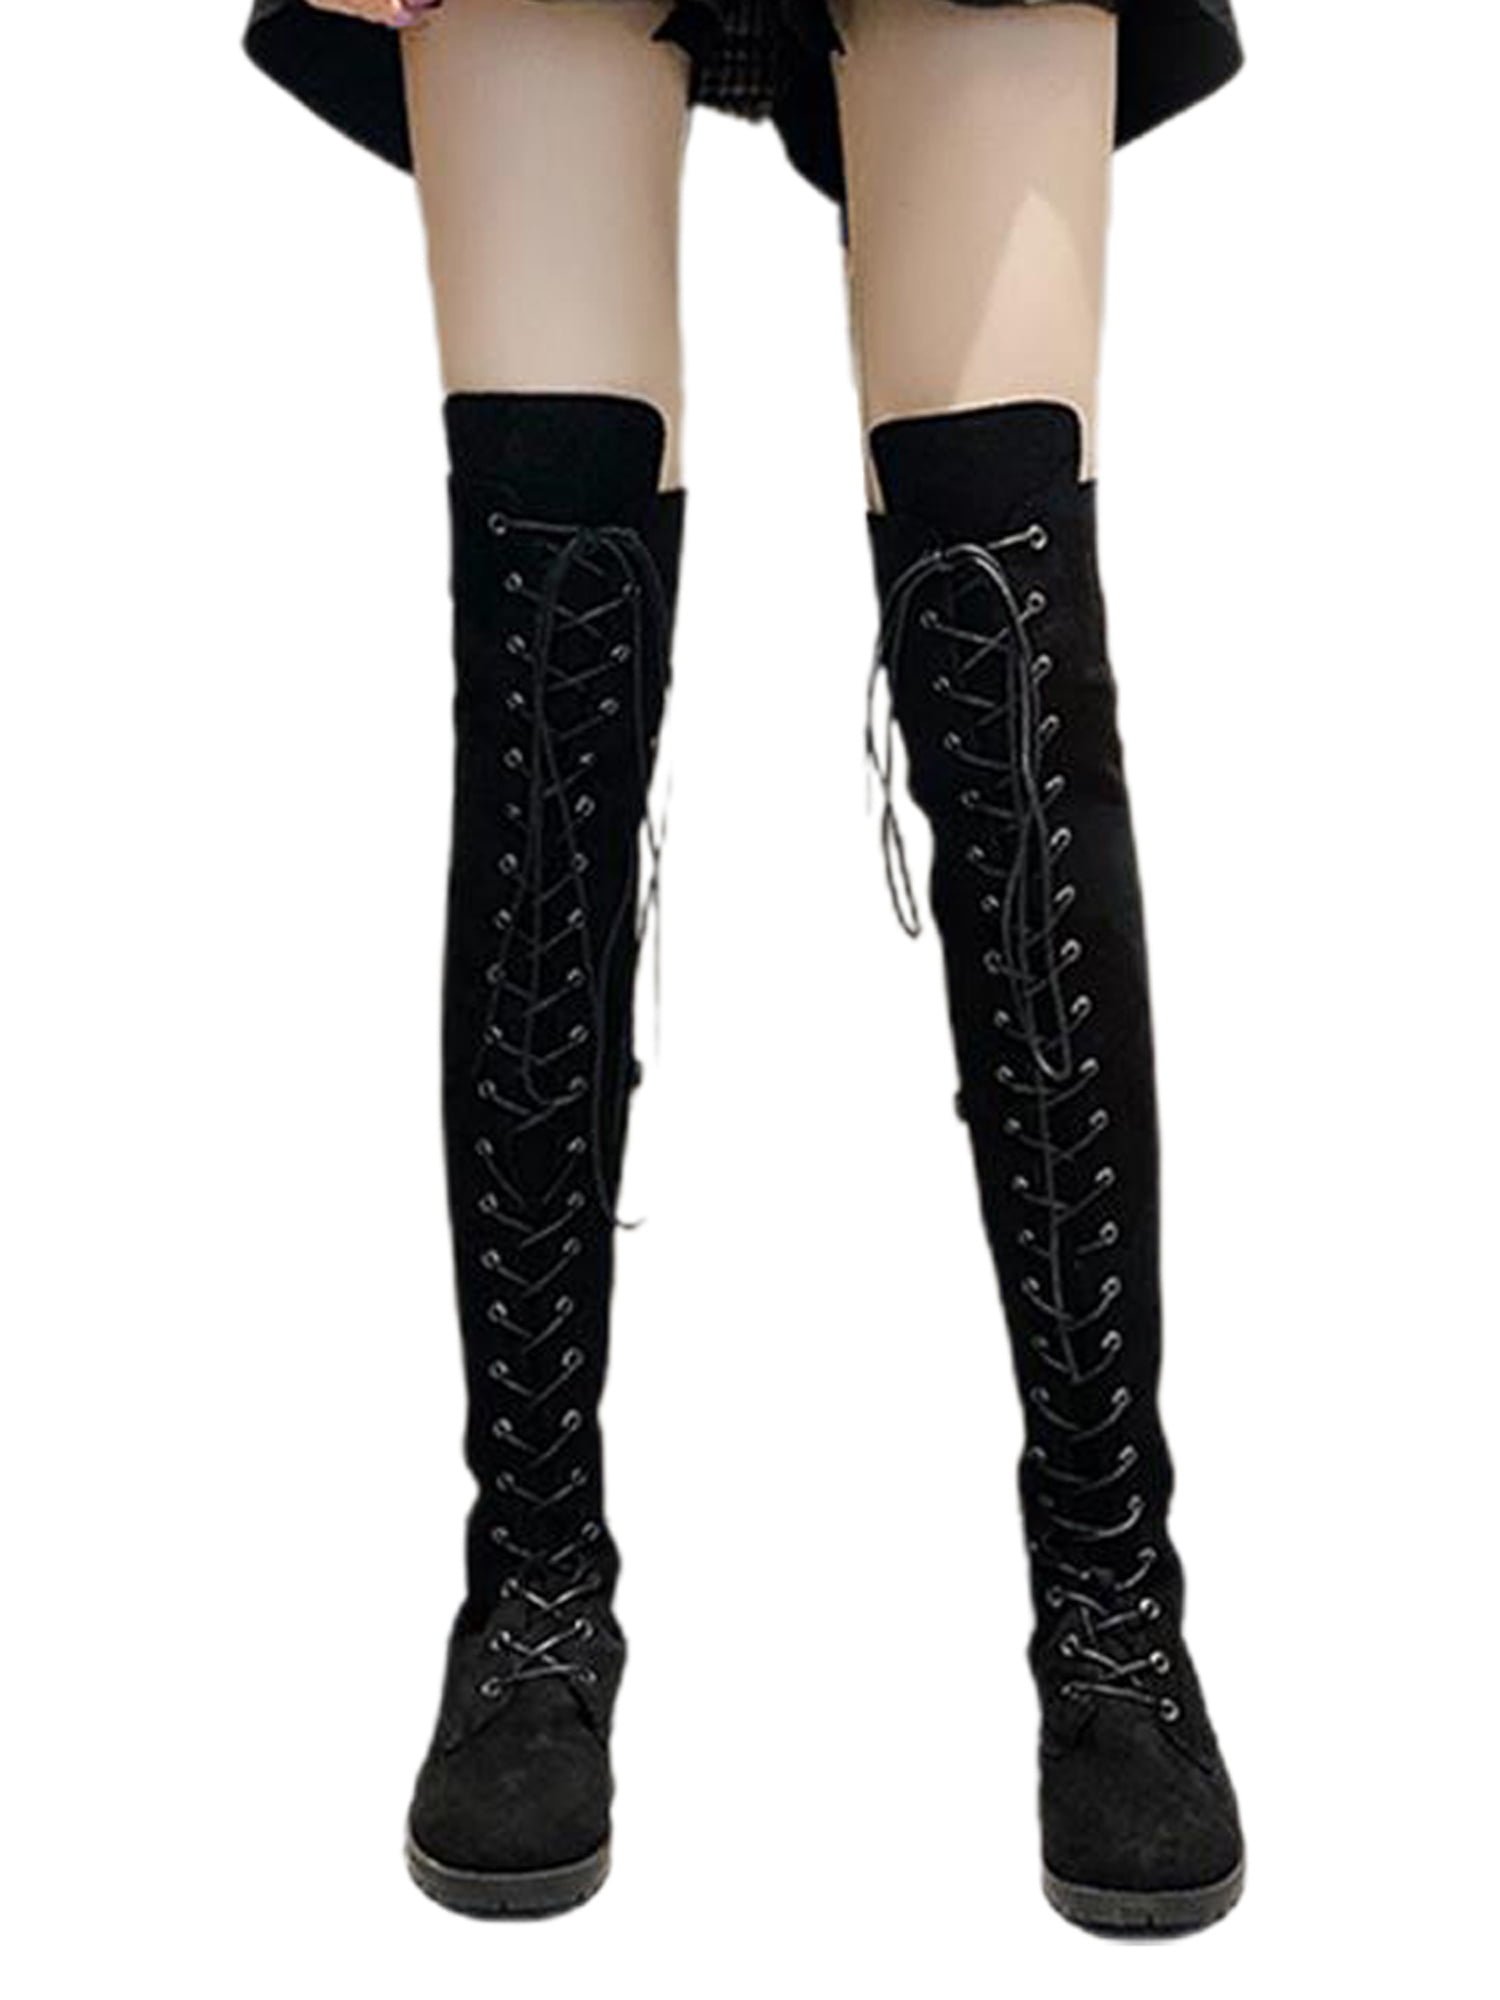 Womens Block Heel Thigh High Over The Knee Boots Stretch Knight Boots Shoes Size